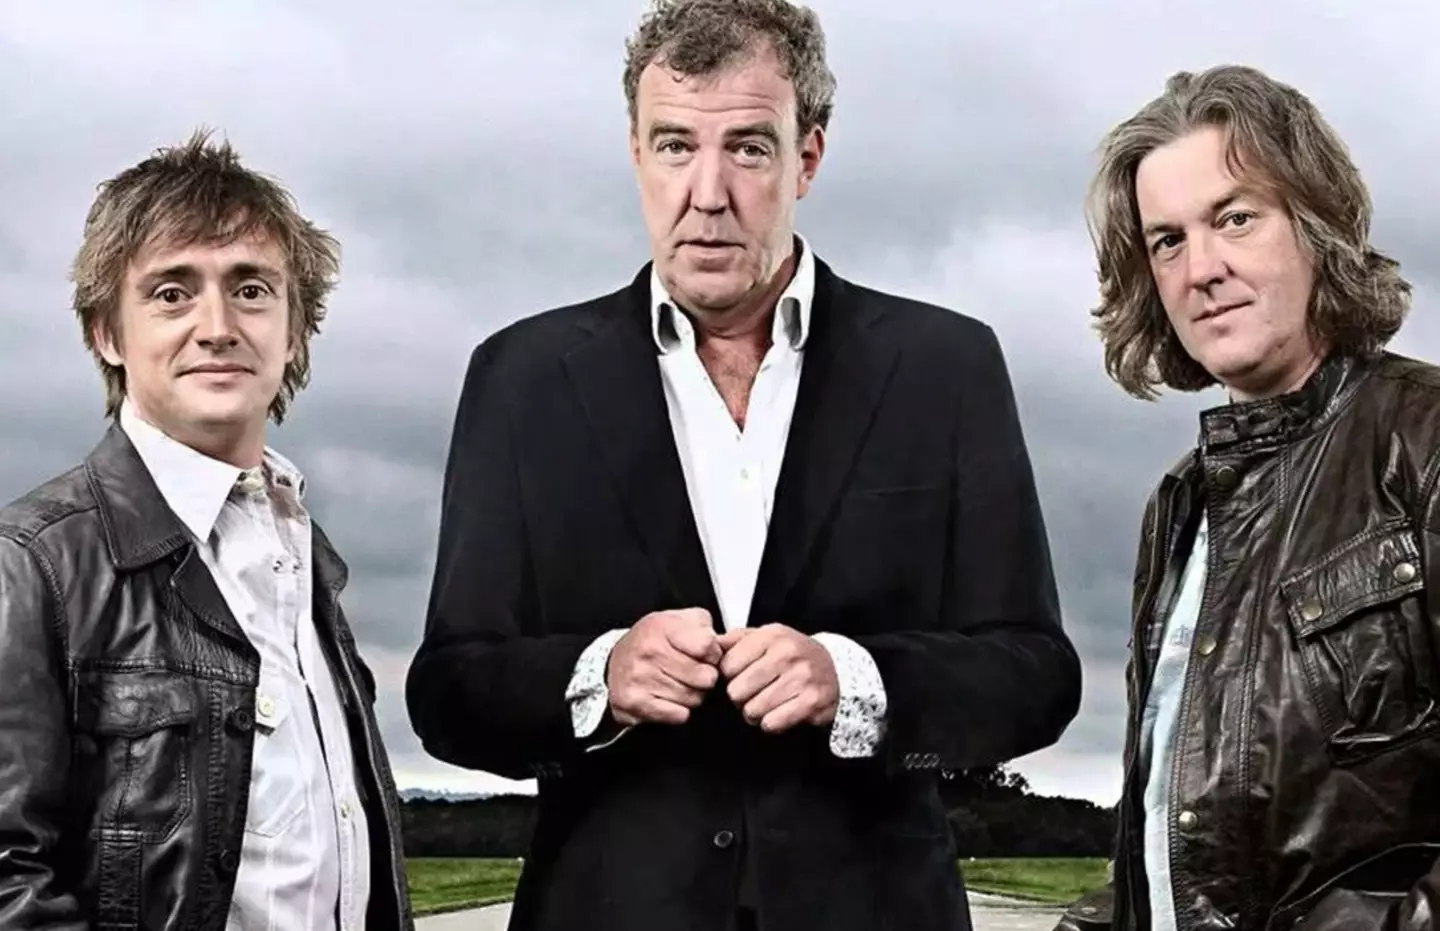 Jeremy Clarkson hit out at the new Top Gear series recently.